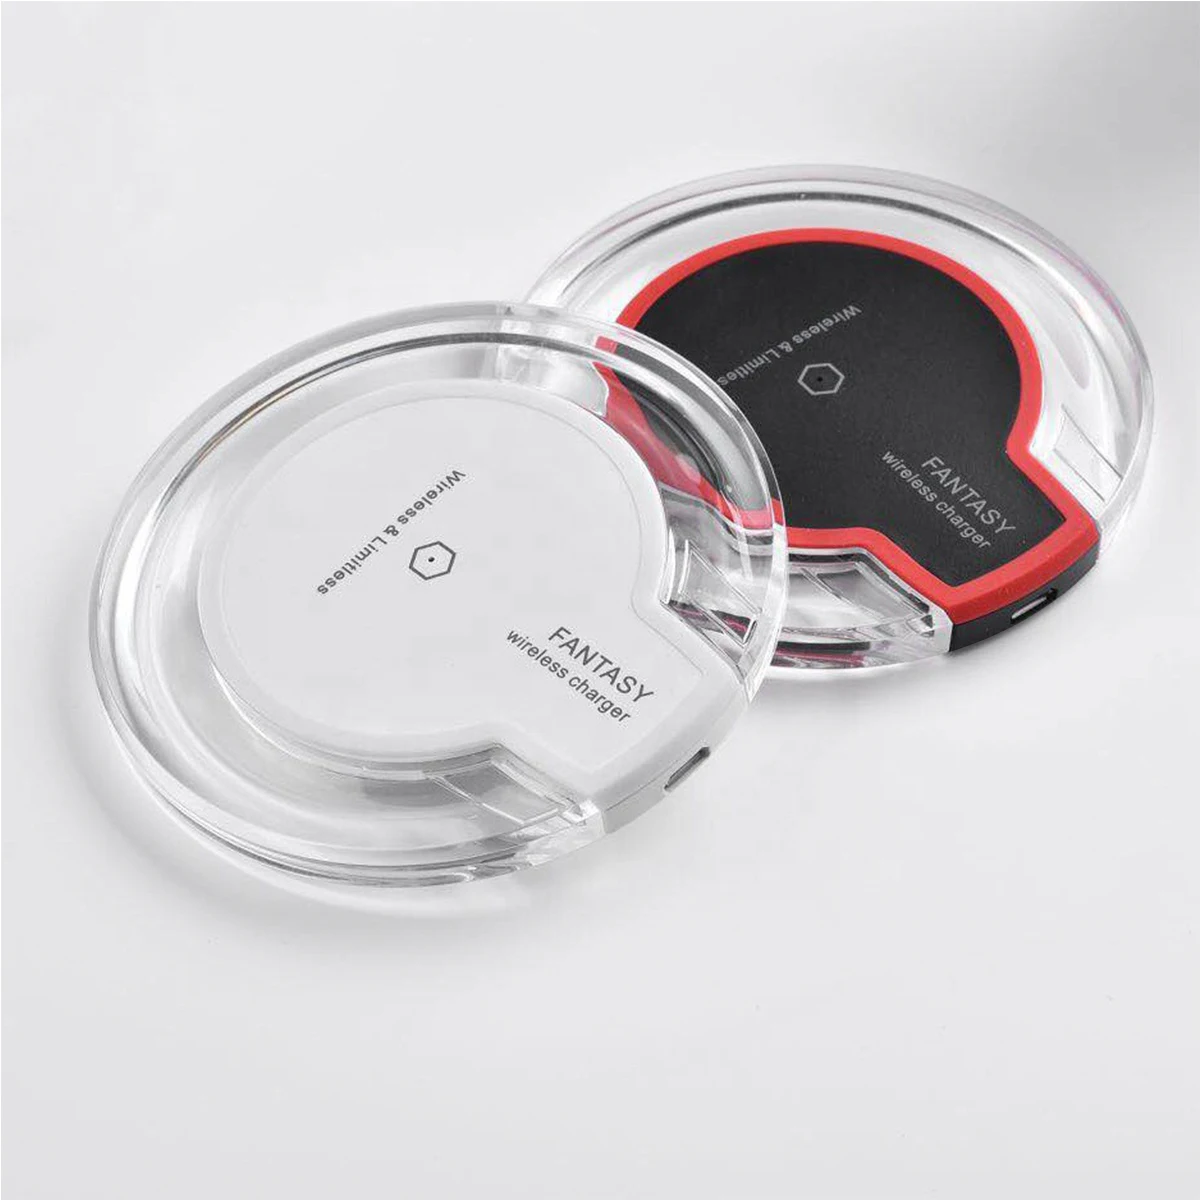 

50% Discount Universal Qi Certified 15w Wireless Charger Mobile Cellphone Wireless Charging For Apple iPhone 11 12 Pro Max, Black+red, white